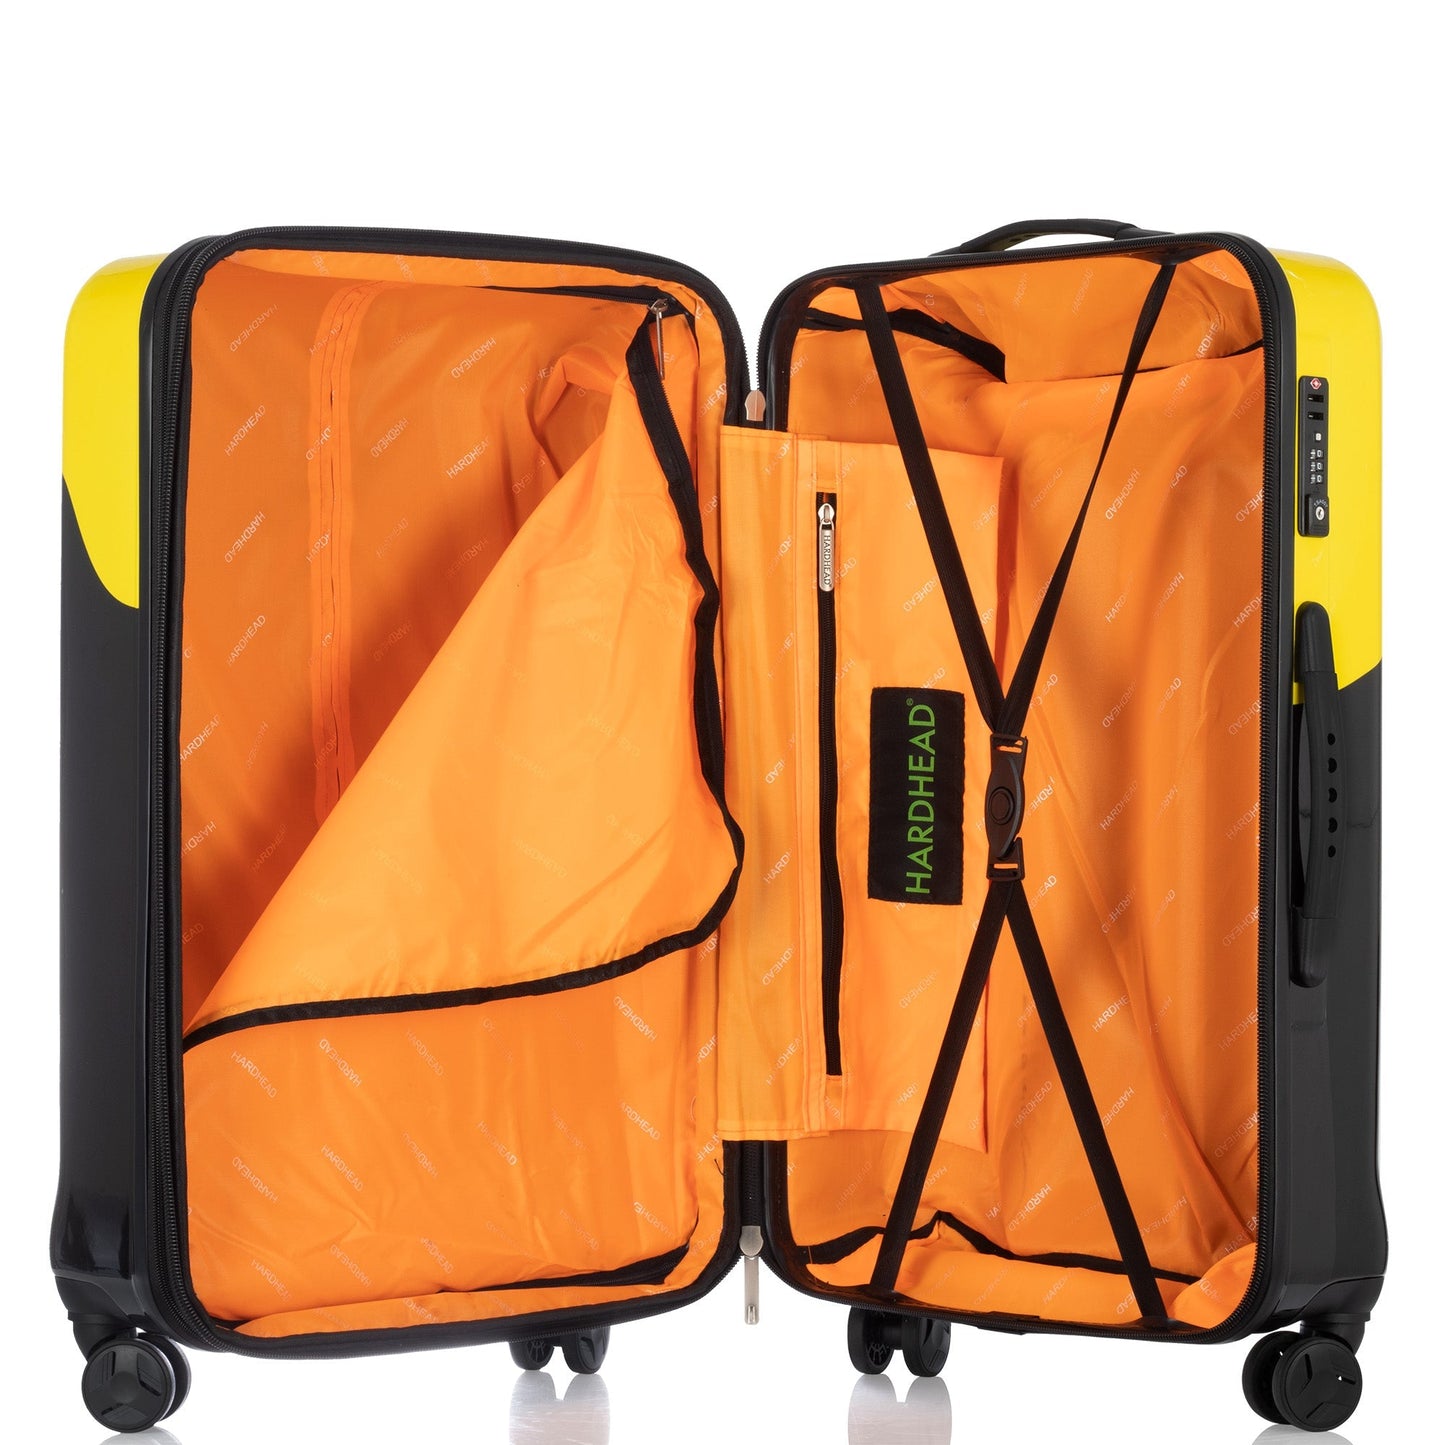 Melted Slime Collection Black with Orange/Yellow/Green Luggage (22/26/30") Suitcase Lock Spinner Hardshell